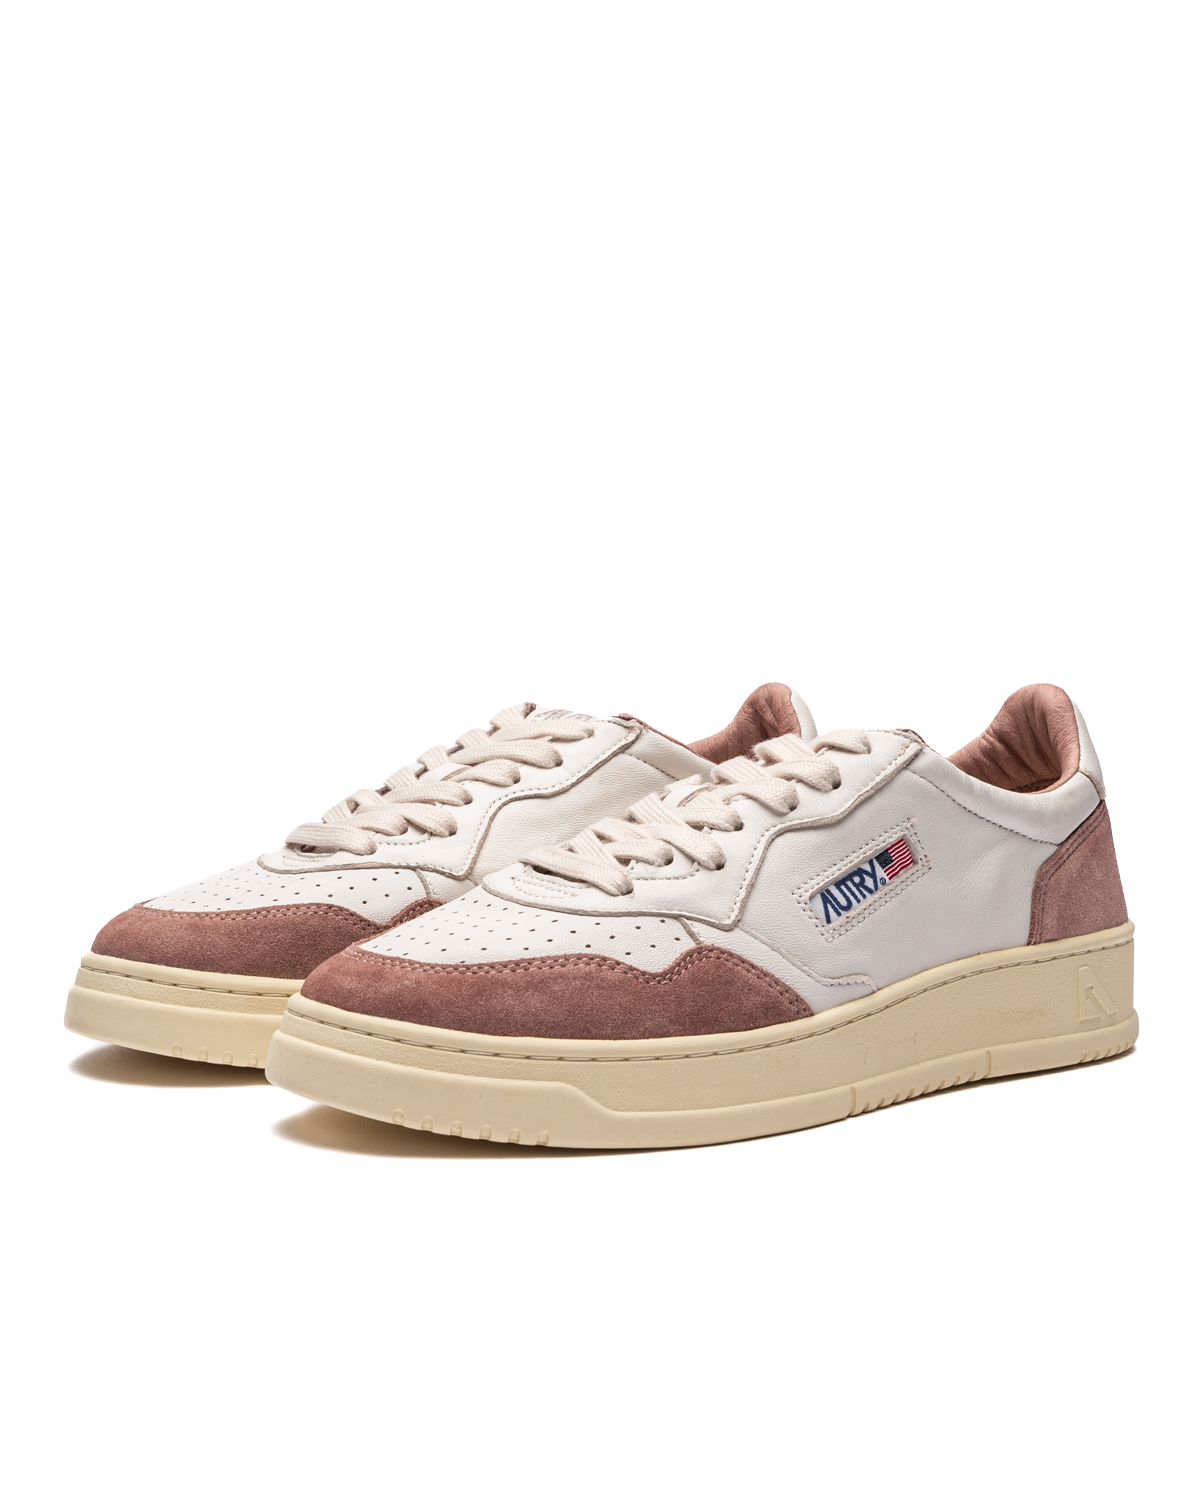 Medalist Goat Suede White/Nude